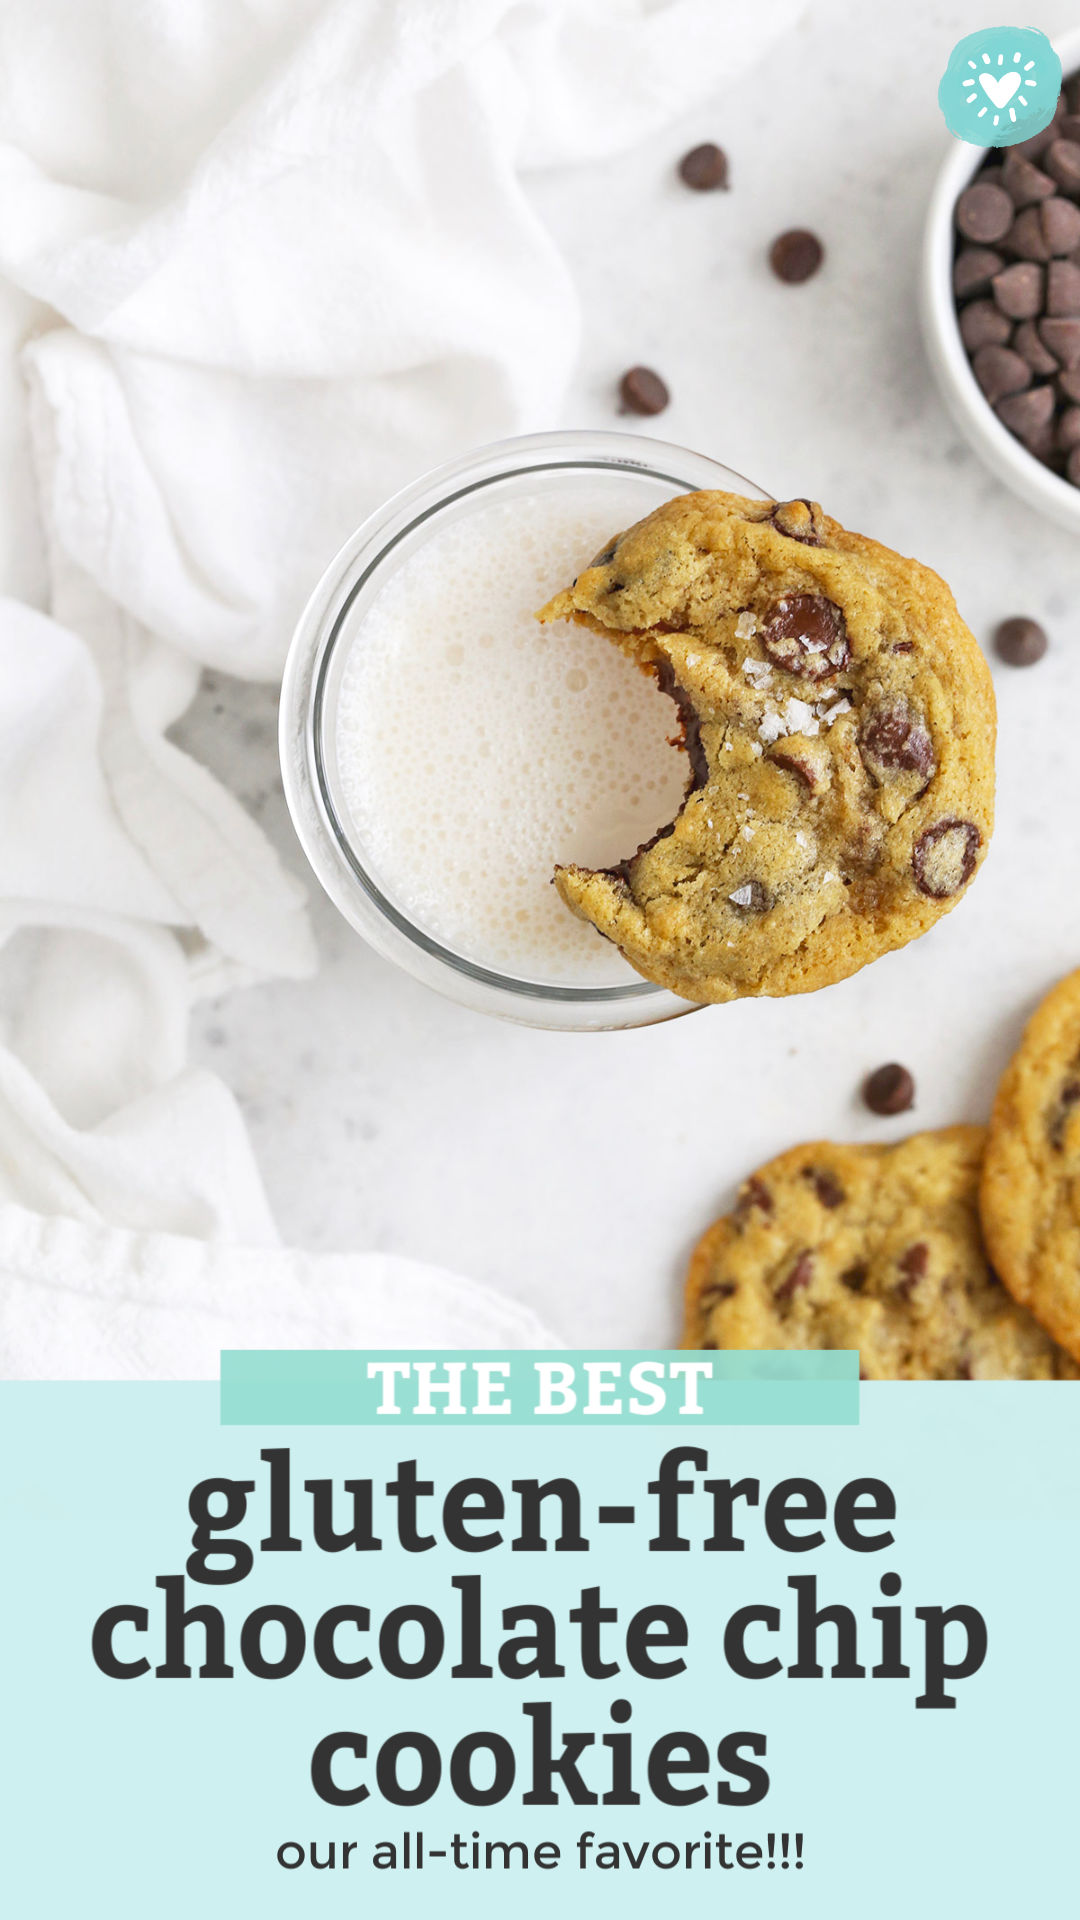 Overhead view of gluten-free chocolate chip cookie with a bite out of it resting on a glass of almond milk with text overlay that reads "The Best Gluten Free Chocolate Chip Cookies. Our all-time favorite!"